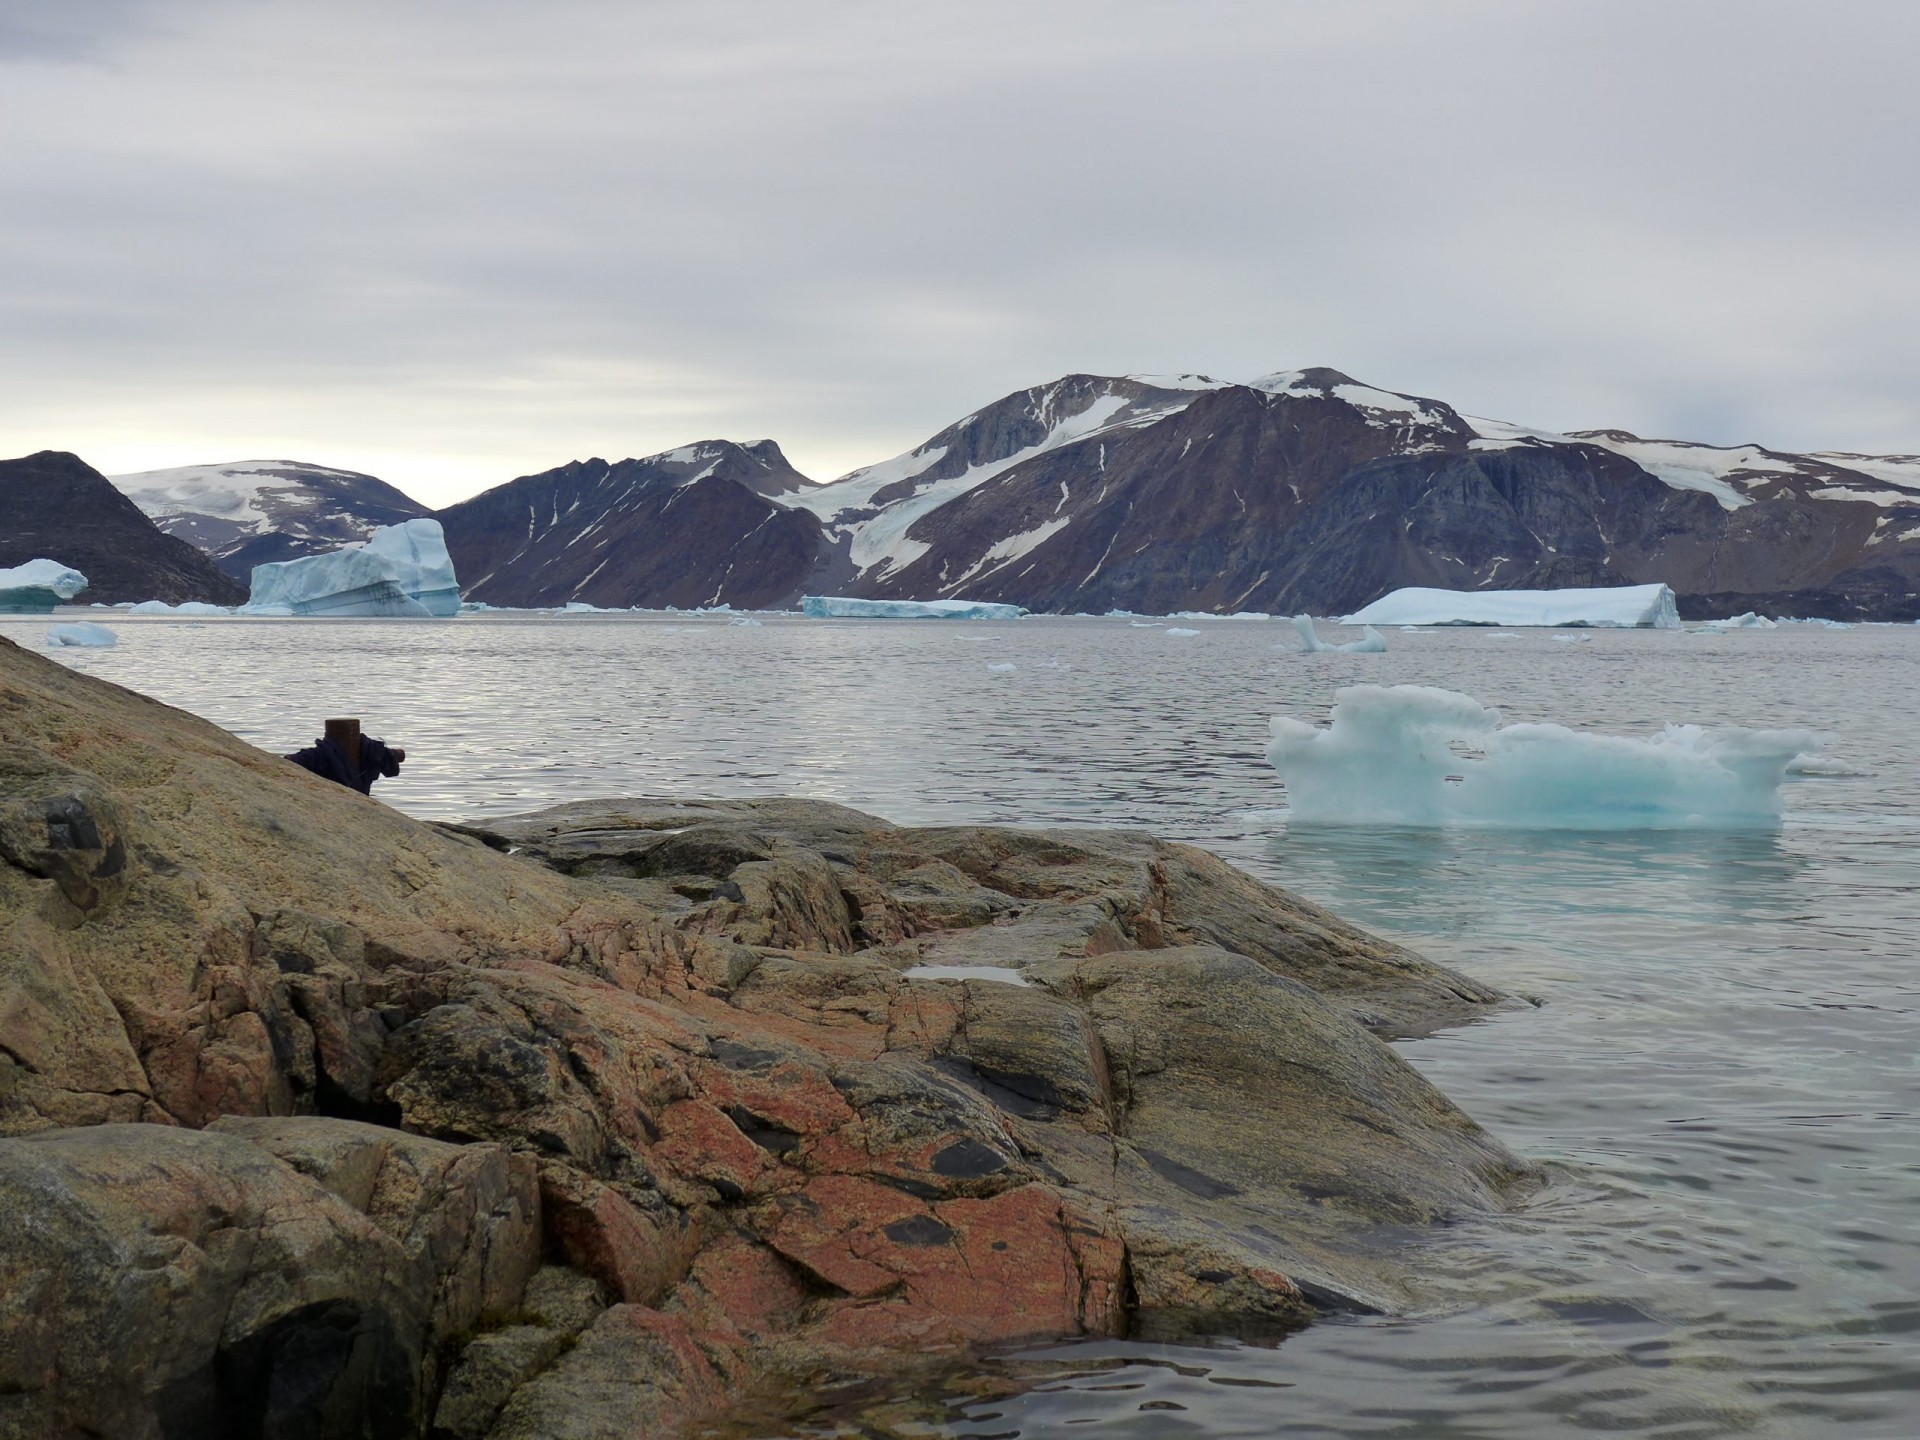 Vikings Abandoned Greenland Centuries Ago in Face of Rising Seas, Says New Study